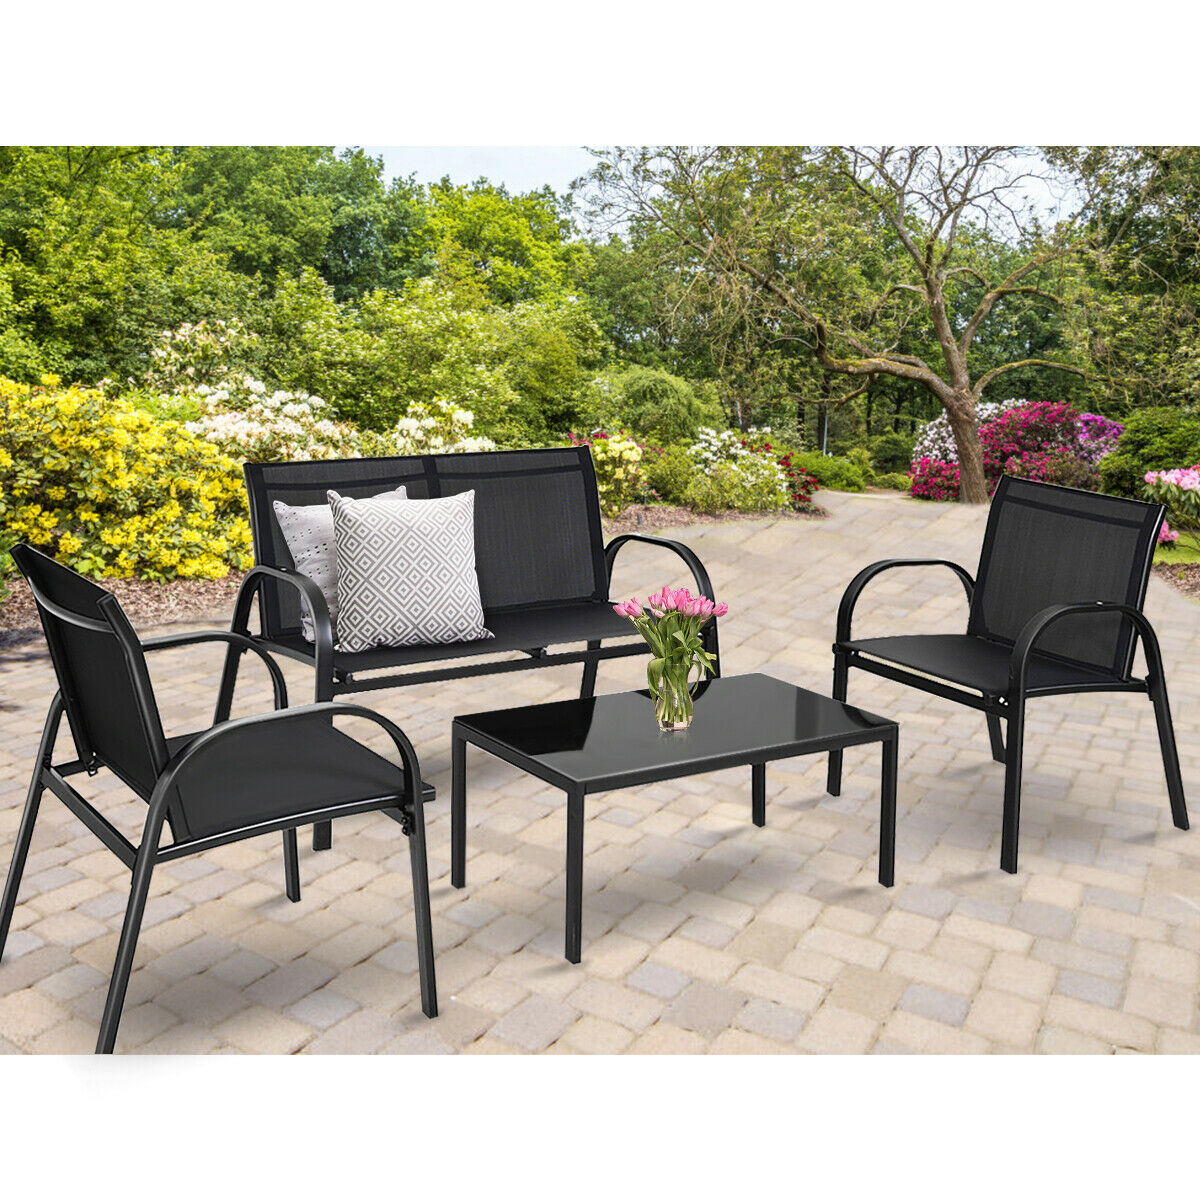 Patio Furniture Walmart within proportions 1200 X 1200